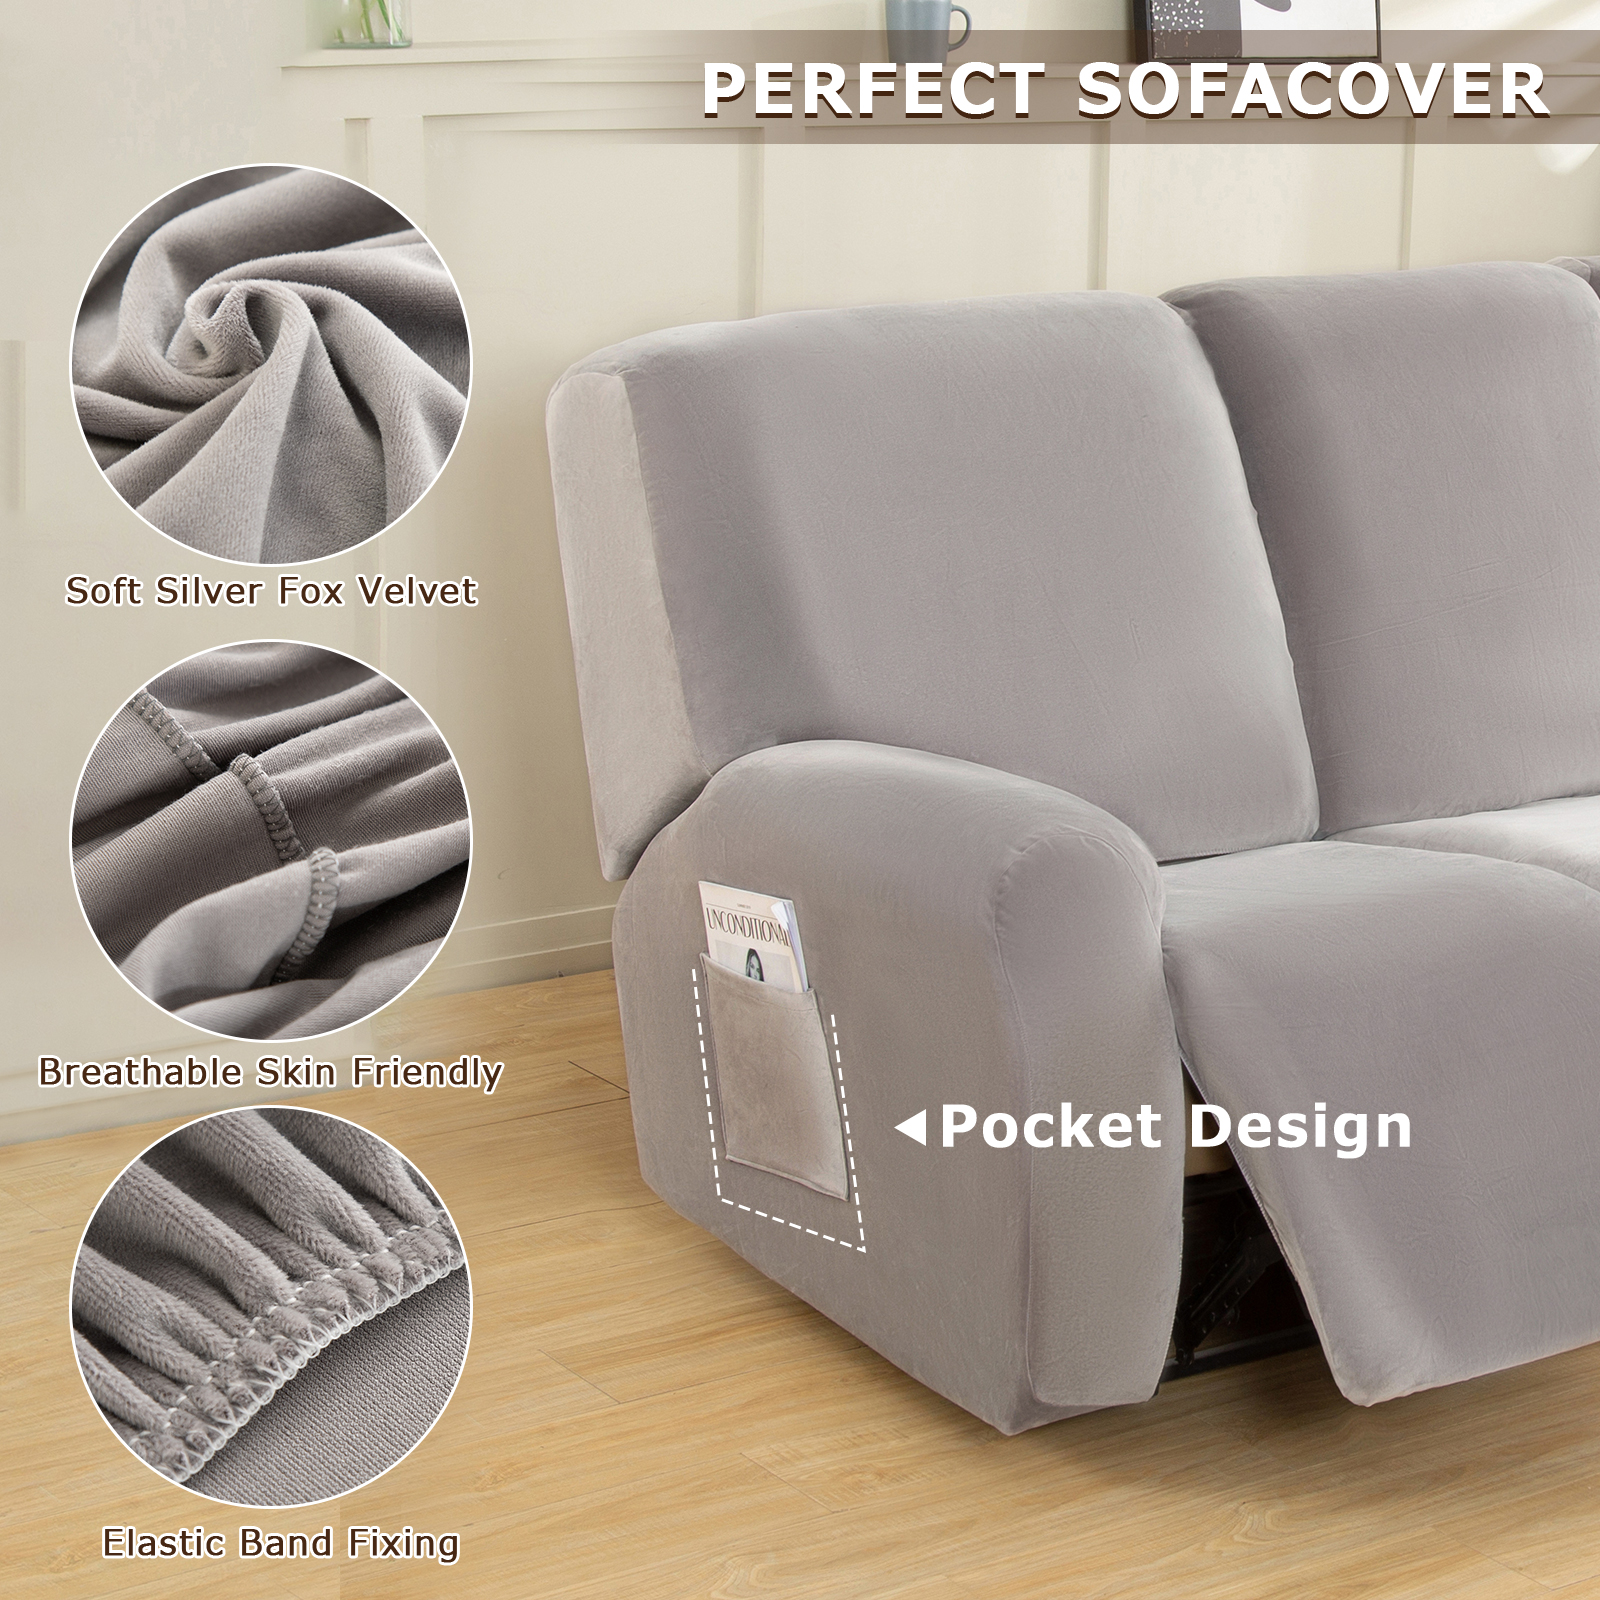 8-piece Recliner Cover with Pockets, Stretch Recliner Chair Slipcover Velvet Plush Fabric Couch Furniture Covers, Silver Gray - image 3 of 9